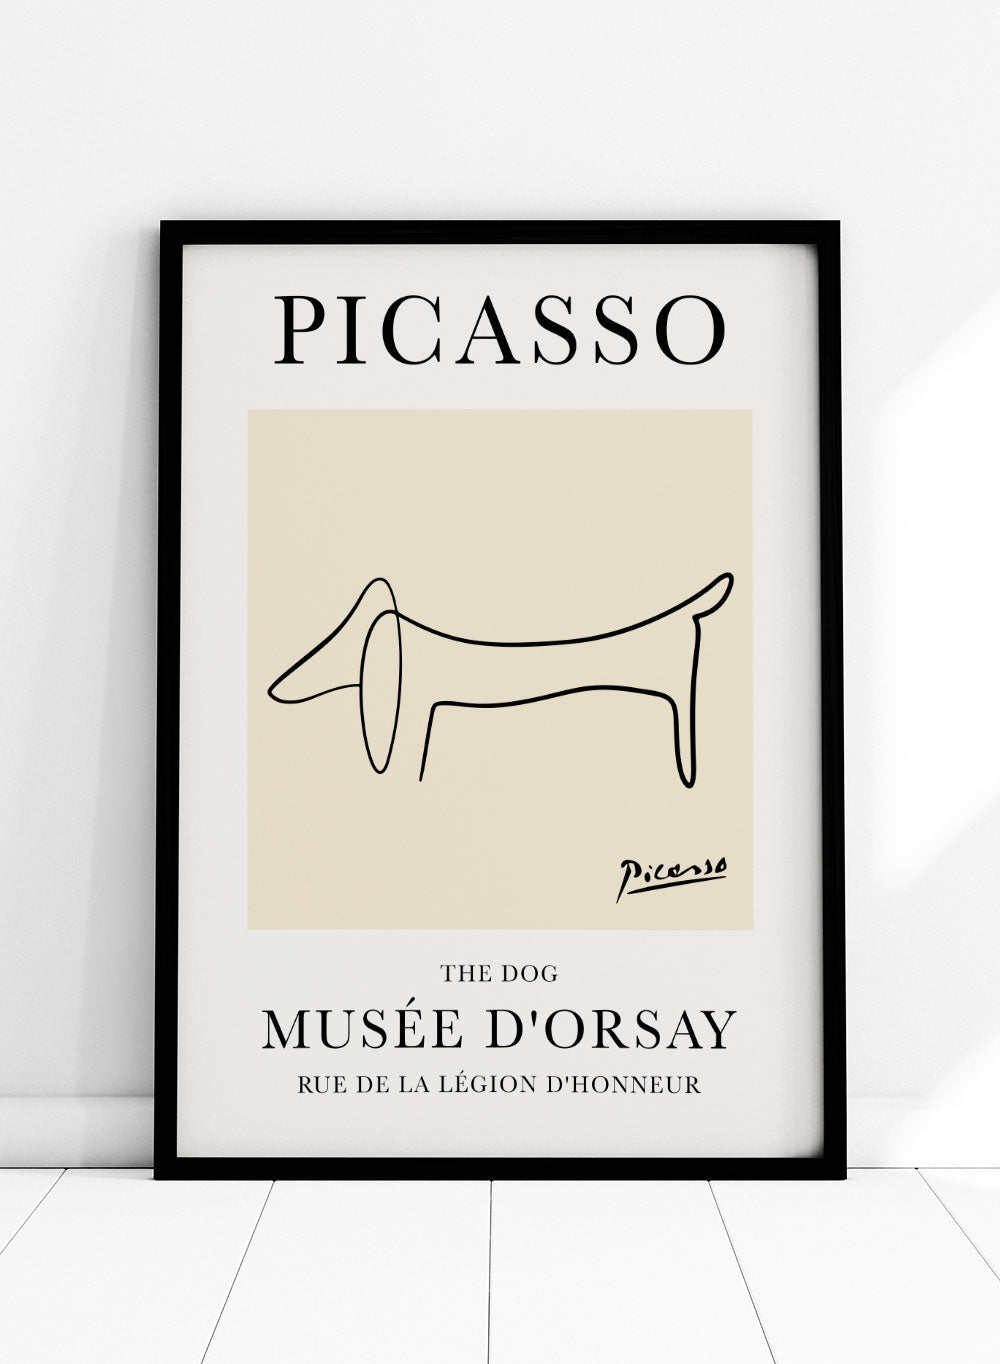 The Dog Line Drawing by Pablo Picasso Print